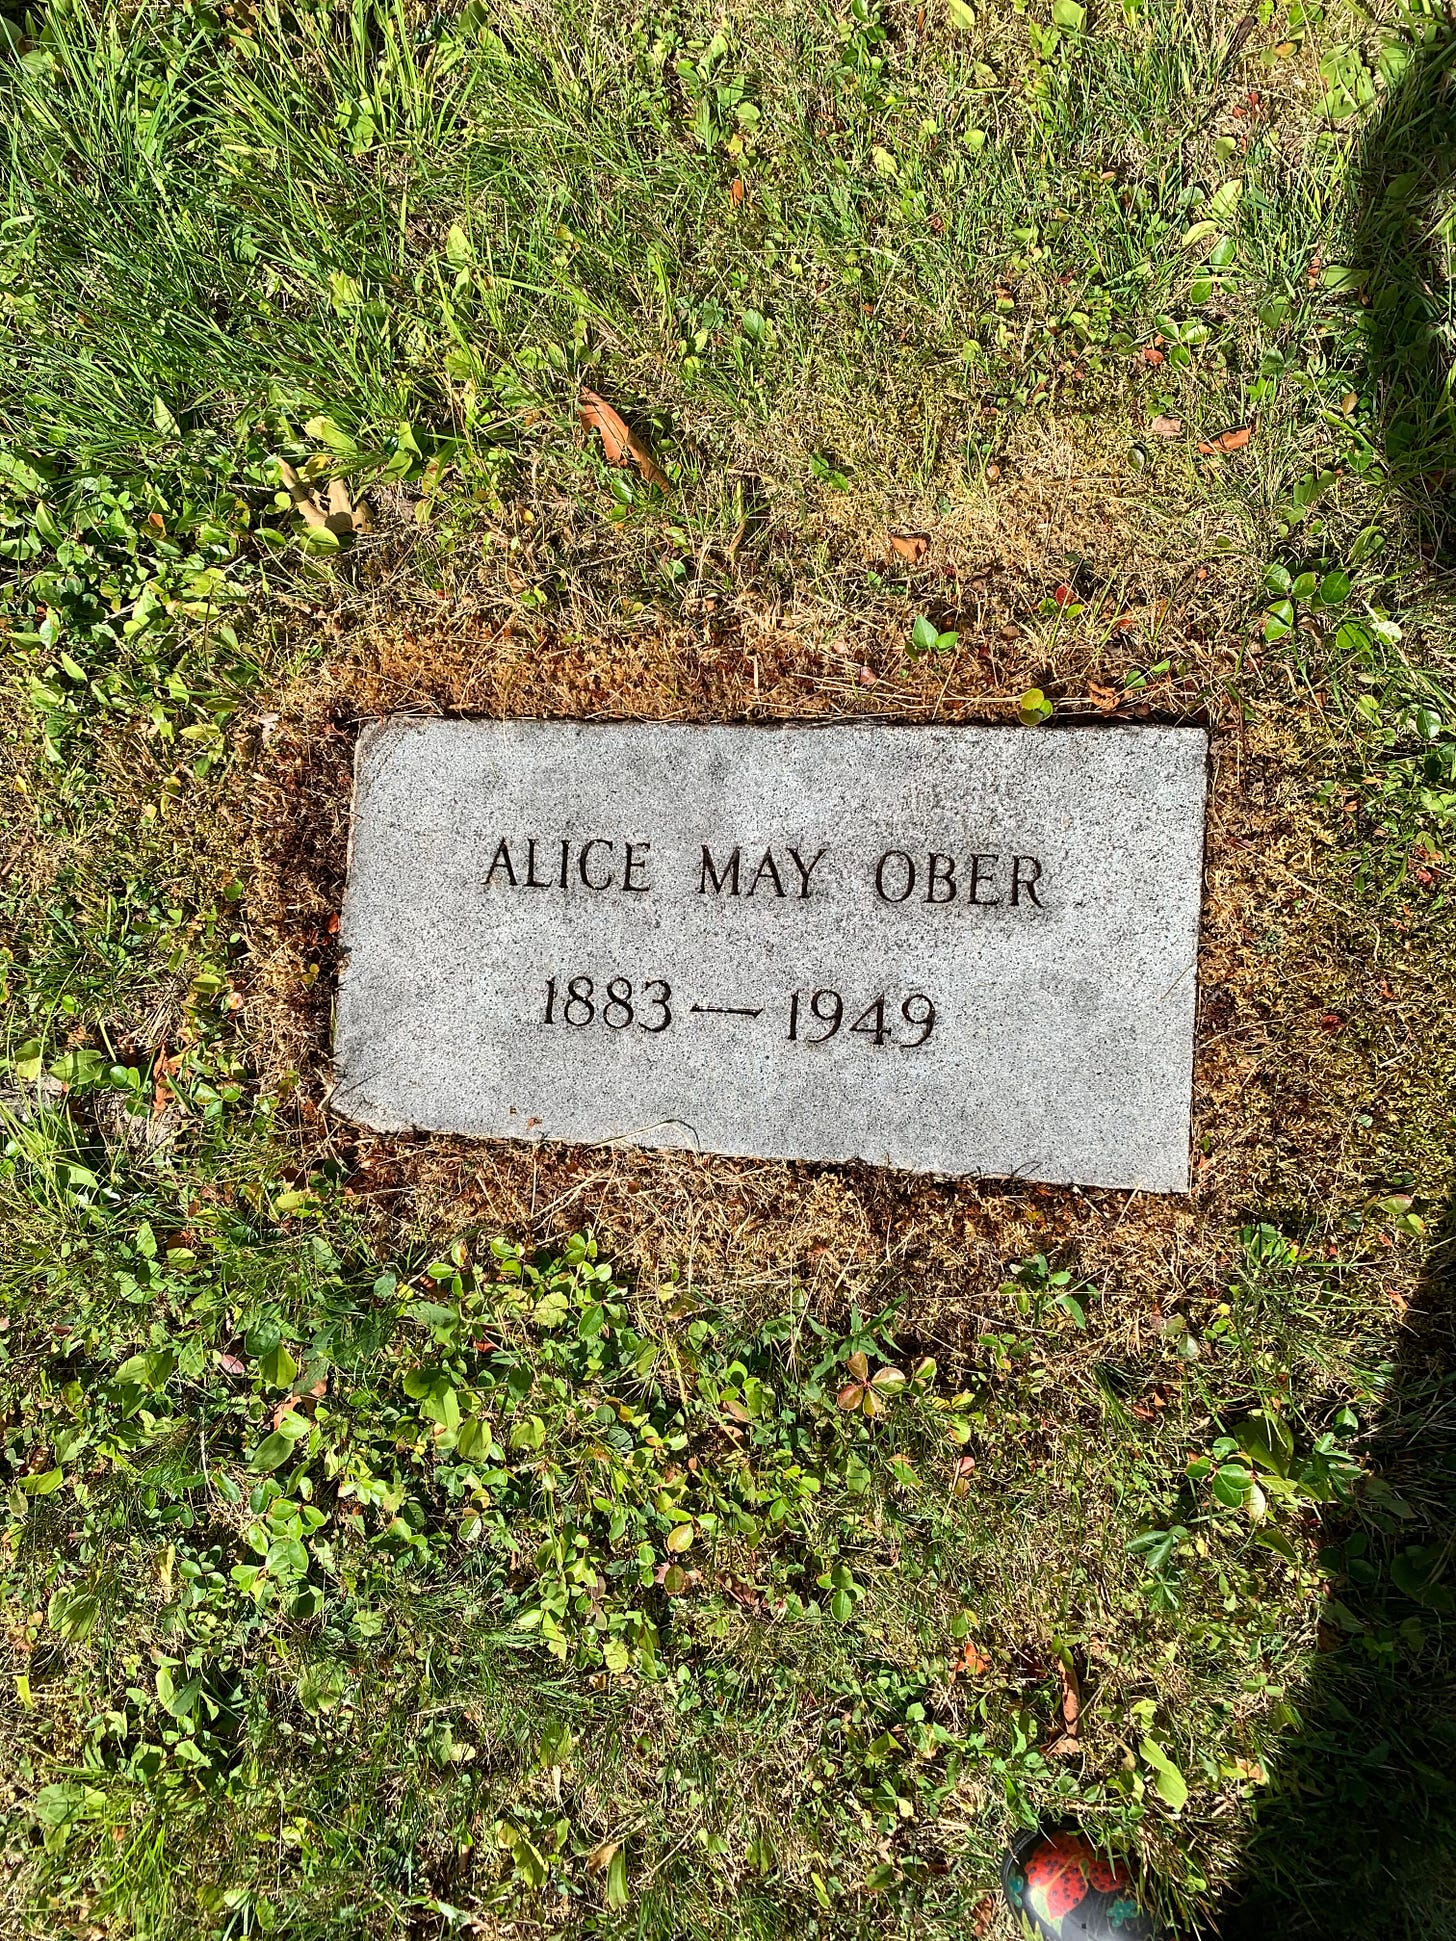 Alice May Ober